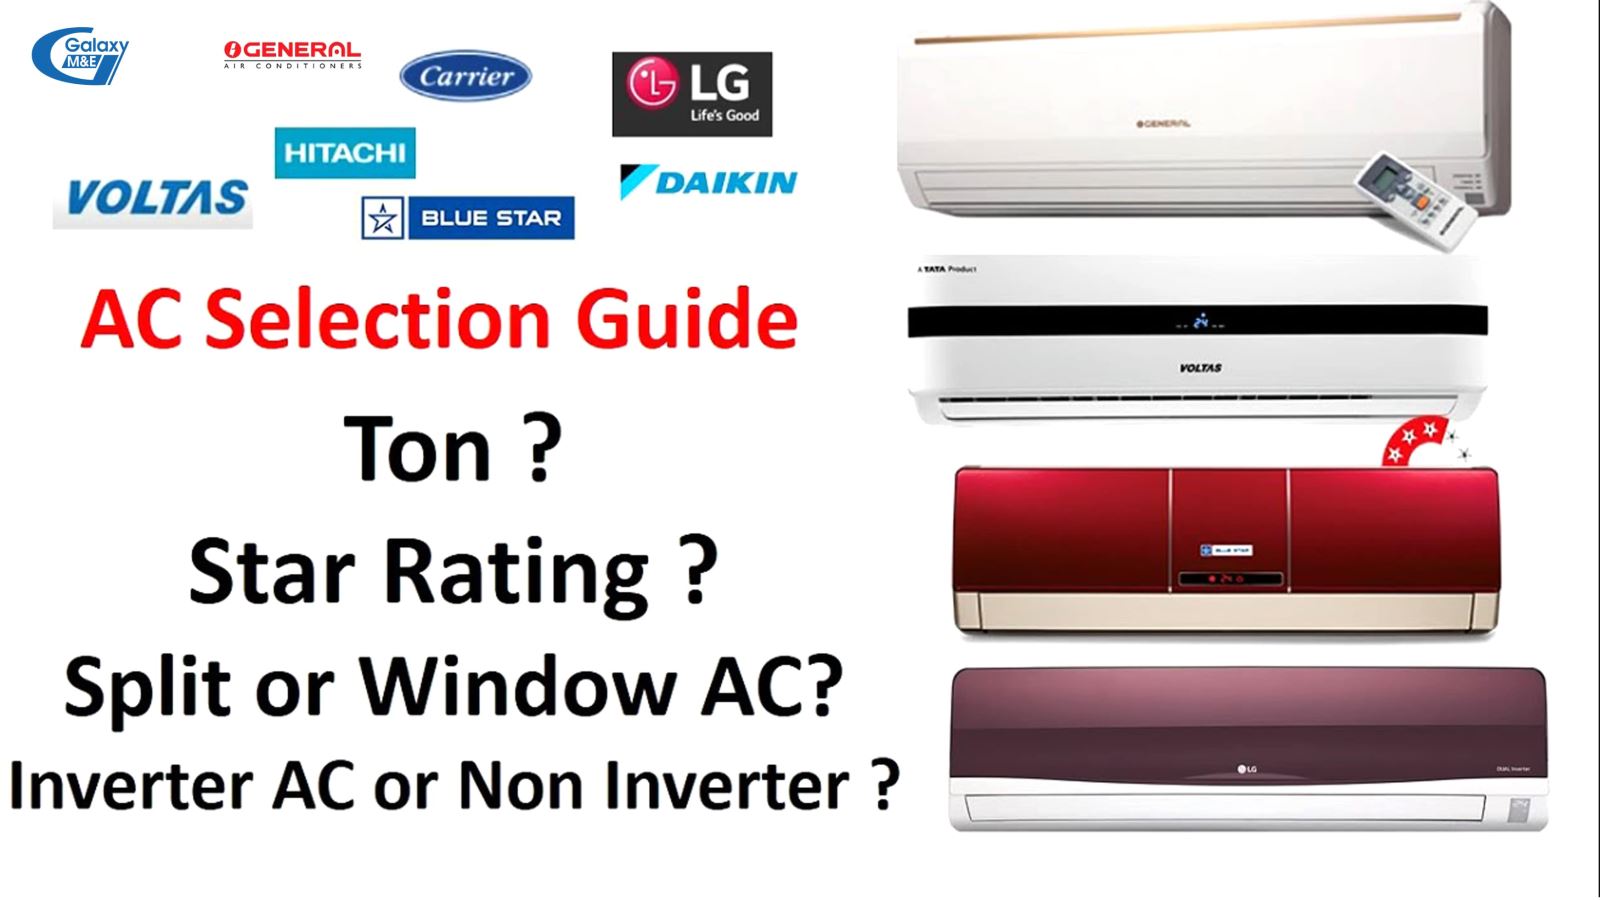 Many different air conditioner brands come with many question marks for choosers.